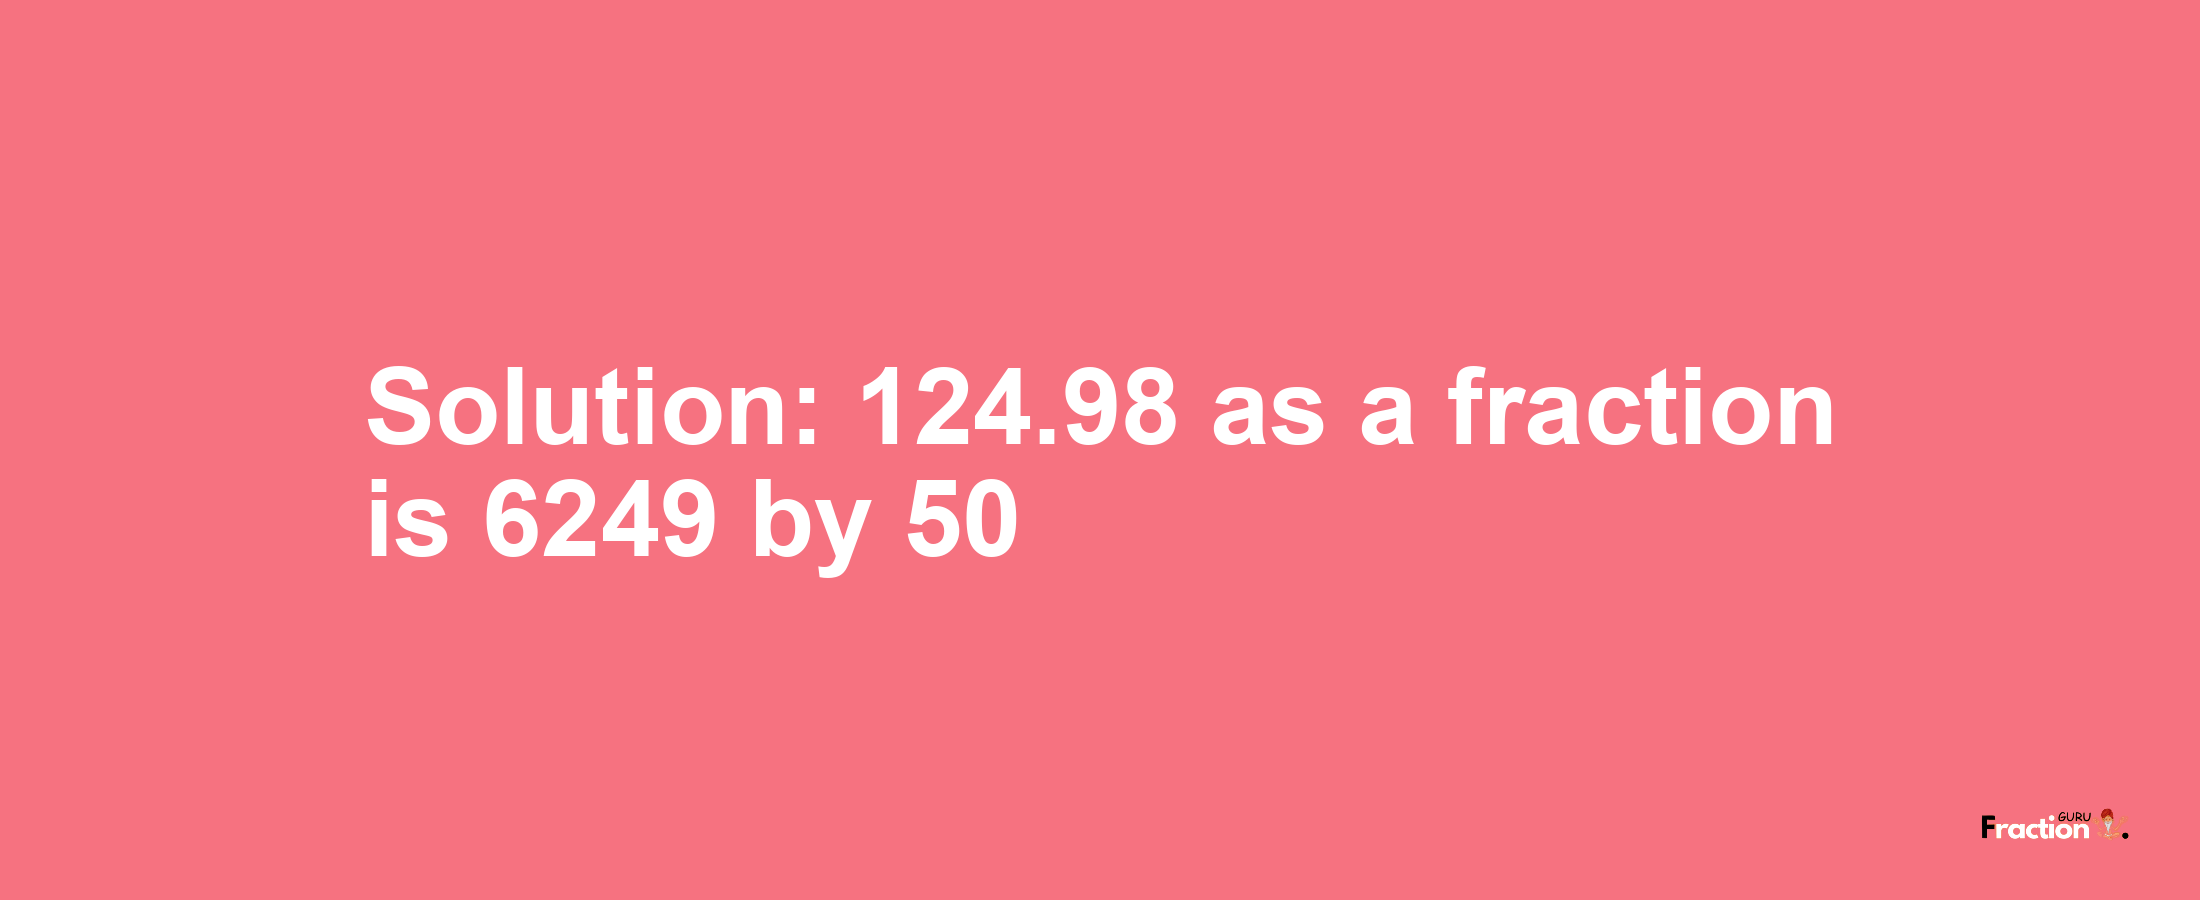 Solution:124.98 as a fraction is 6249/50